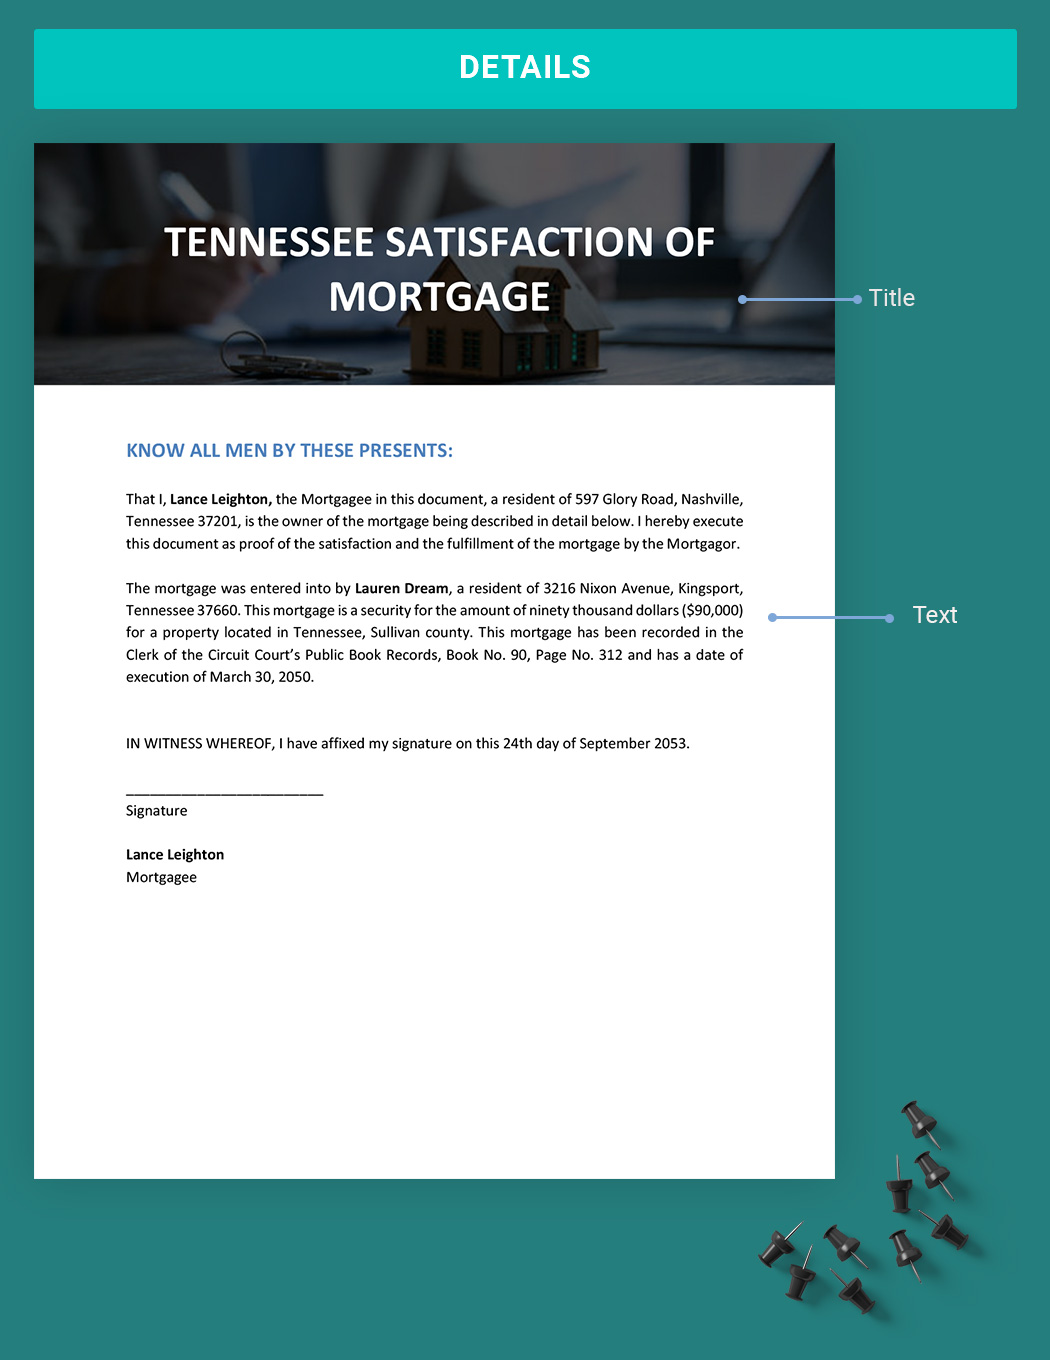 Tennessee Satisfaction of Mortgage Template